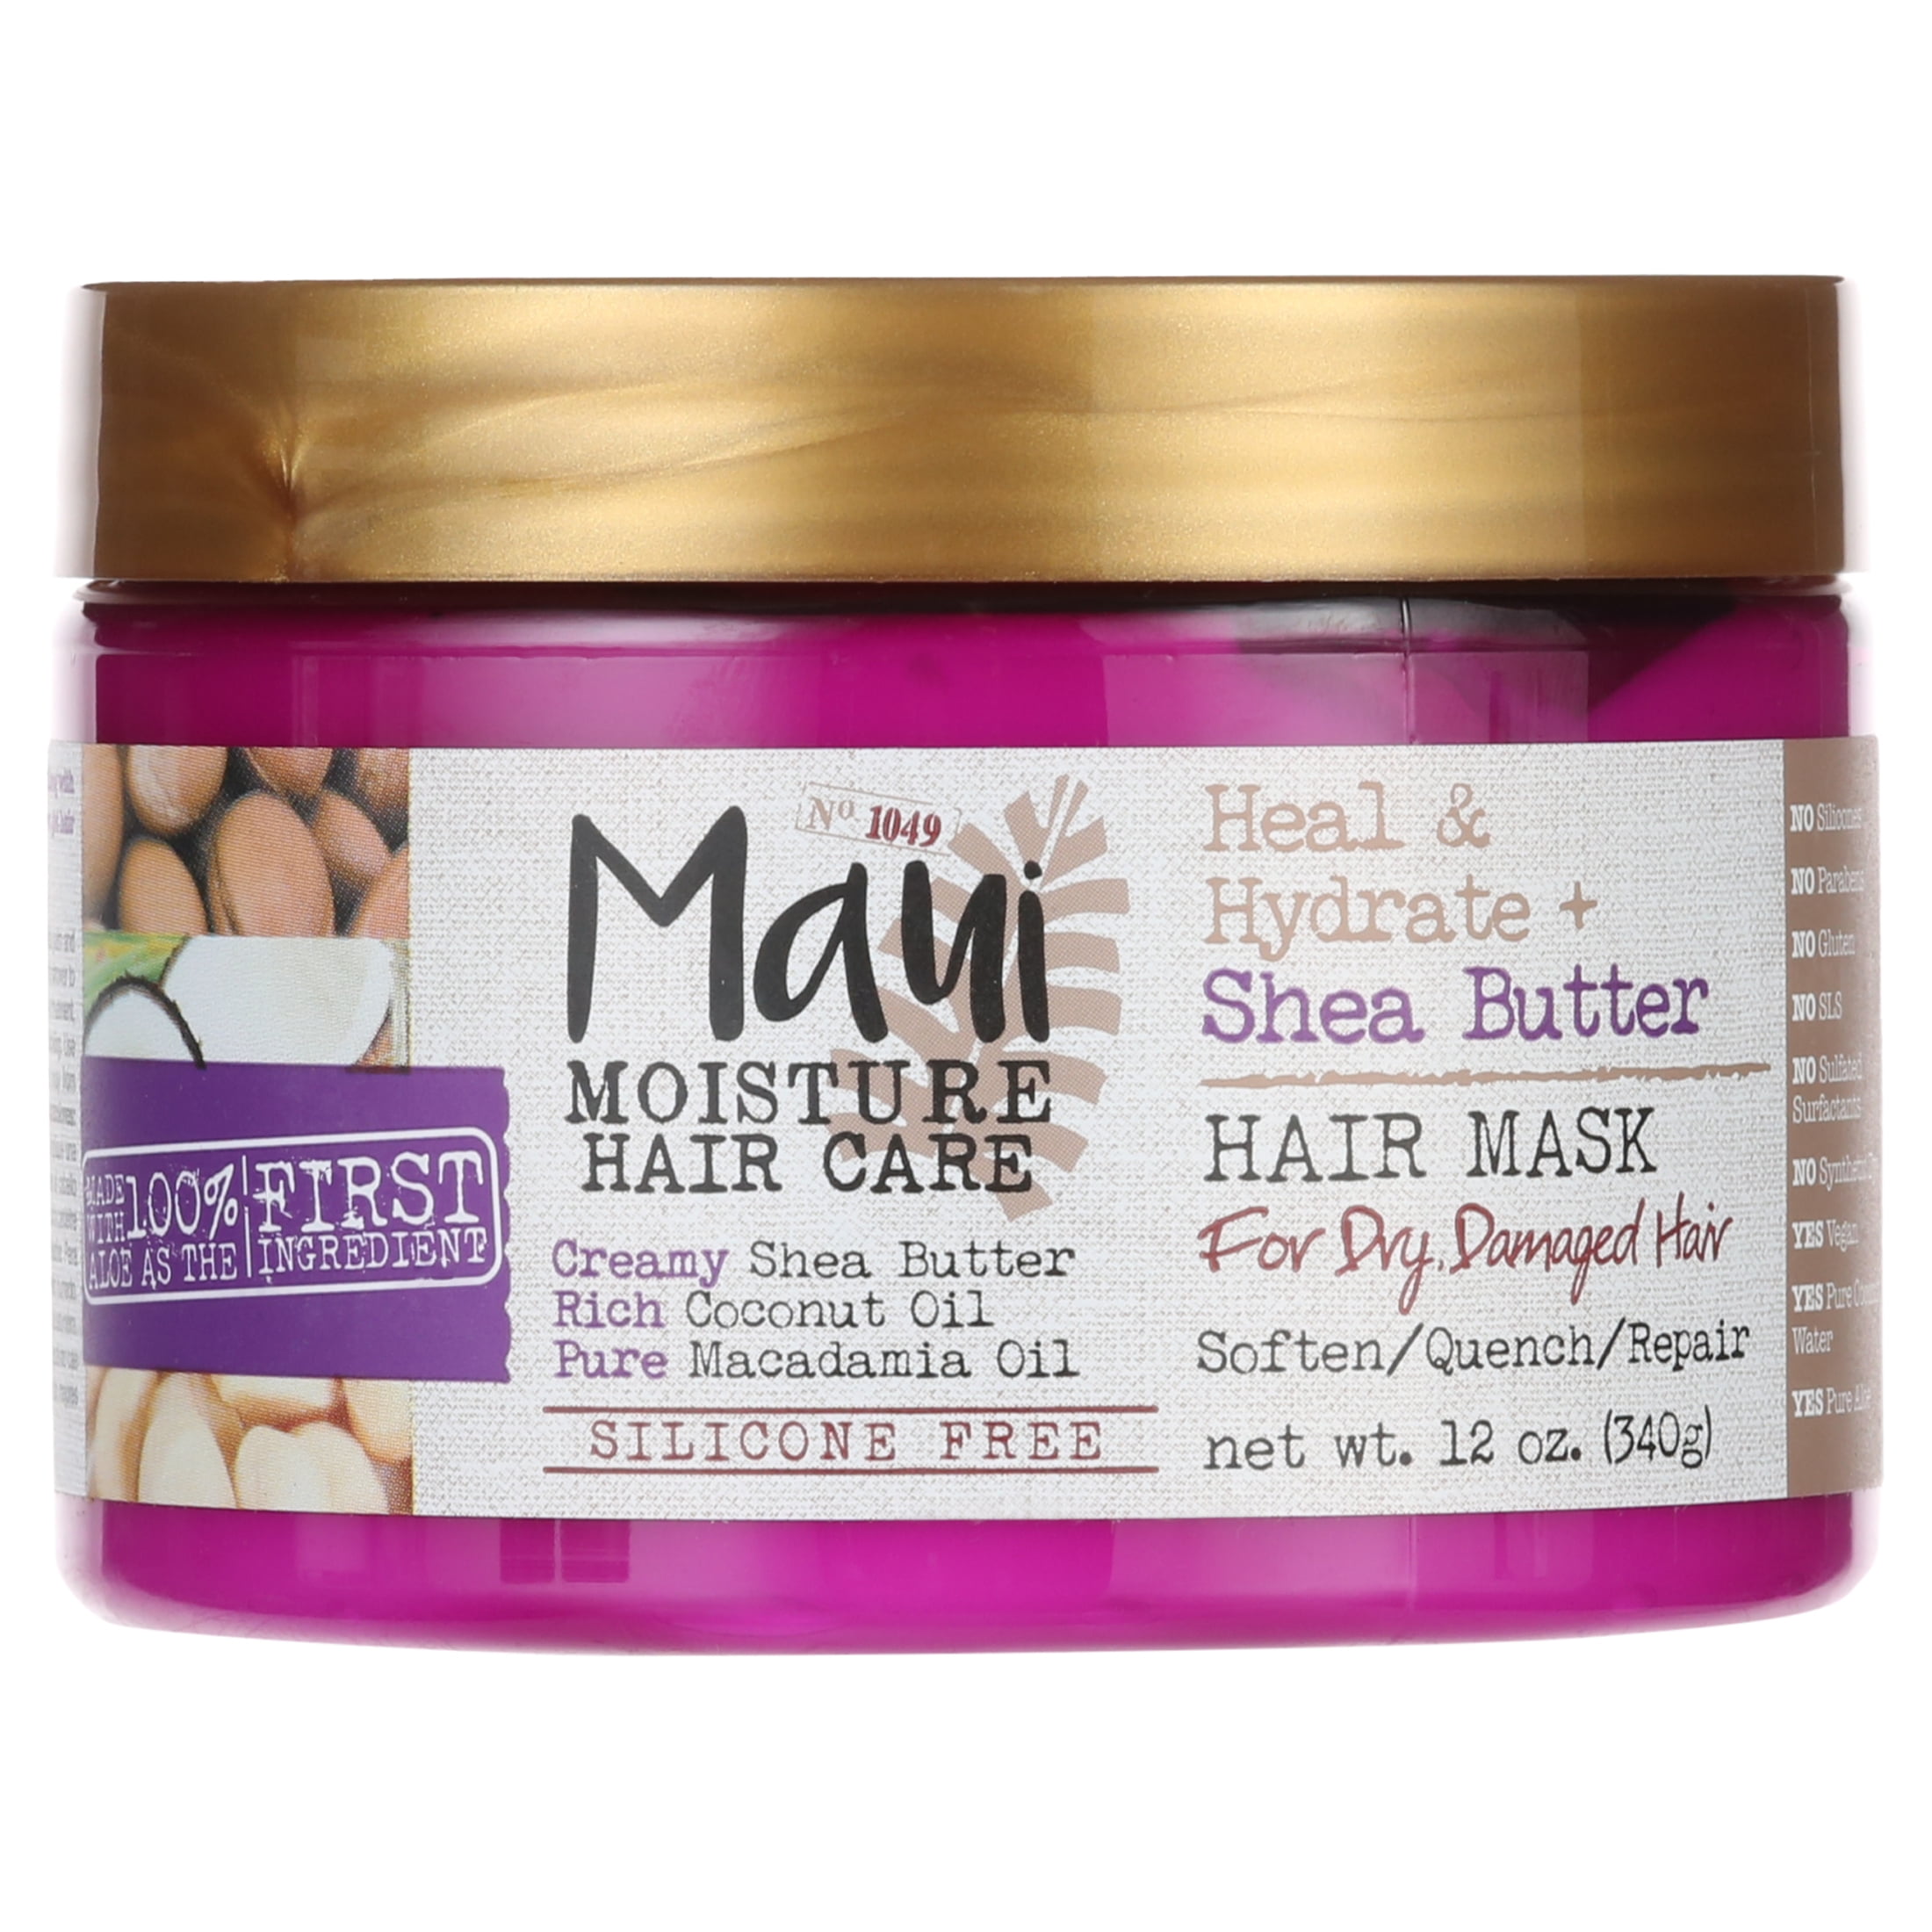 Maui Moisture & Hydrate + Shea Butter Hair Mask & Leave-In Conditioner Treatment to Deeply Nourish Curls & Help Repair Split Ends, Vegan, Silicone-, Paraben- & Sulfate-Free, 12 oz - Walmart.com